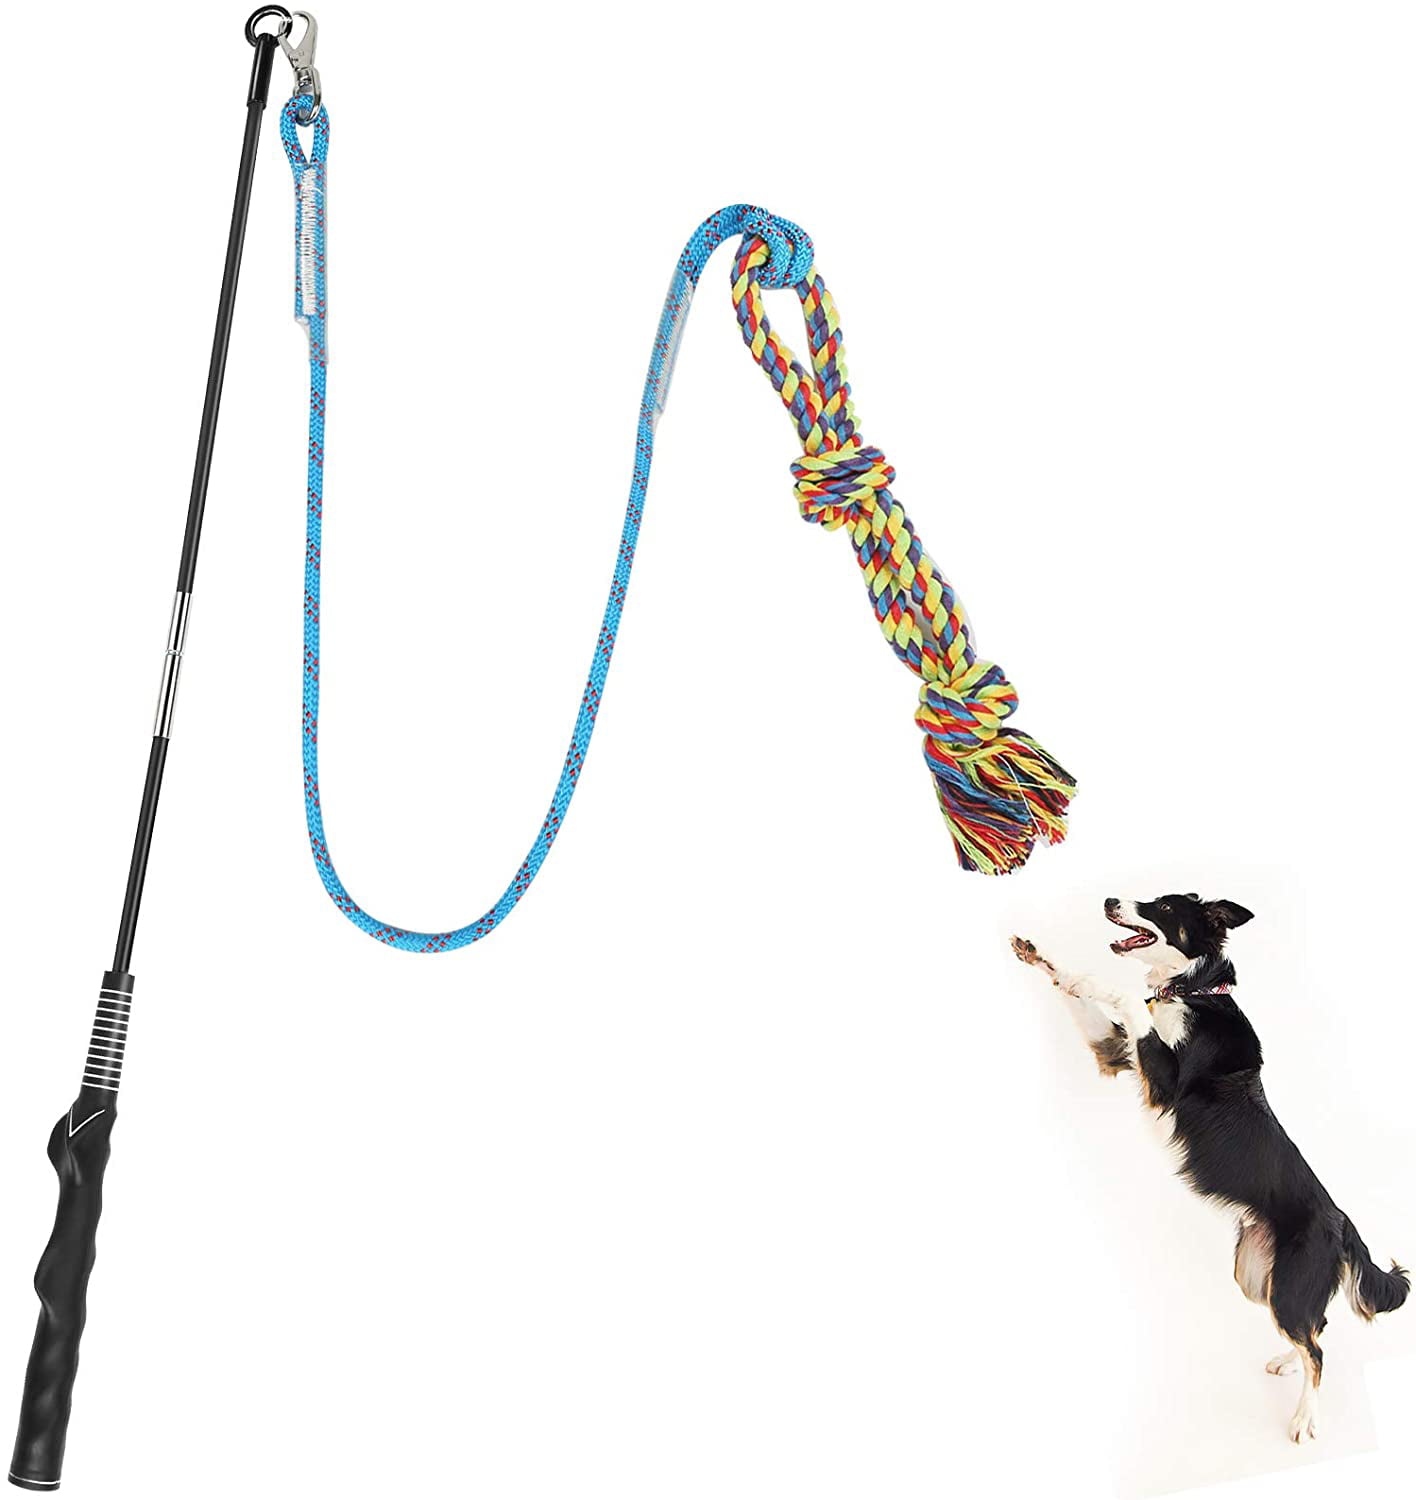 Train and Exercise Size L GoodsBeauty Interactive Dog Toys Black Extendable Flirt Pole with 2pcs Braided Rope Tugs for Dog Outdoor Entertainment 